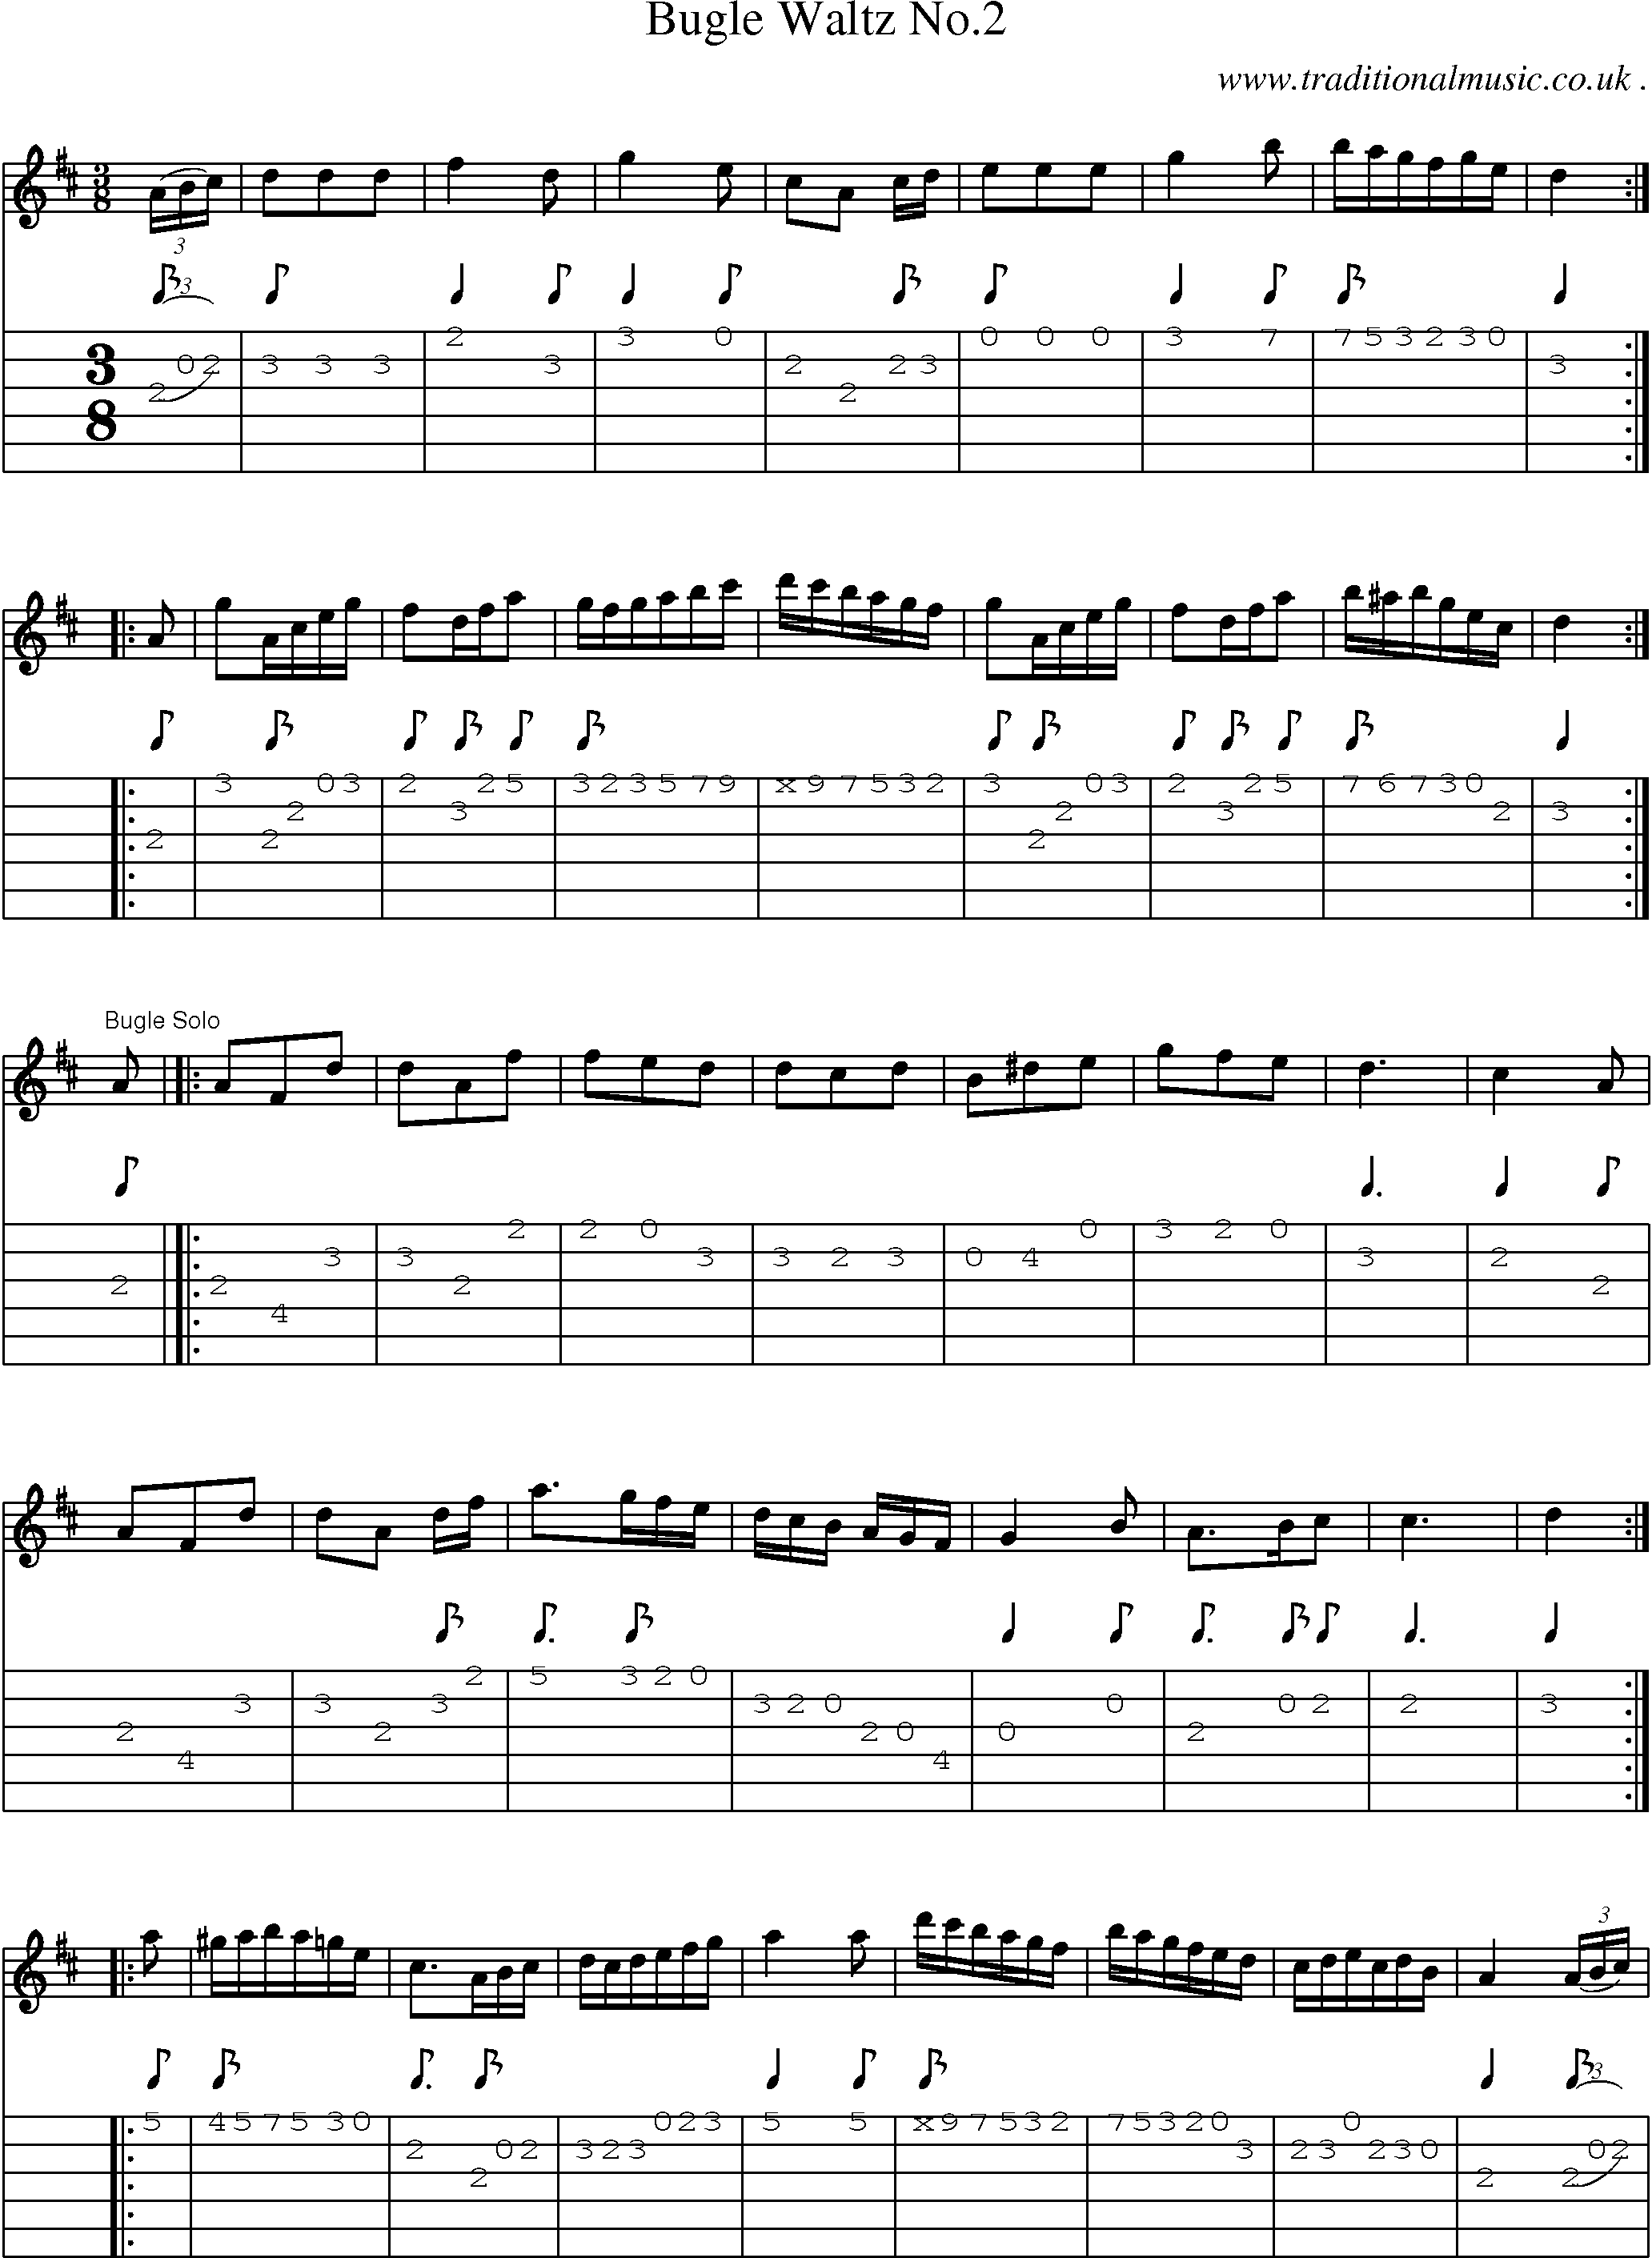 Sheet-Music and Guitar Tabs for Bugle Waltz No2